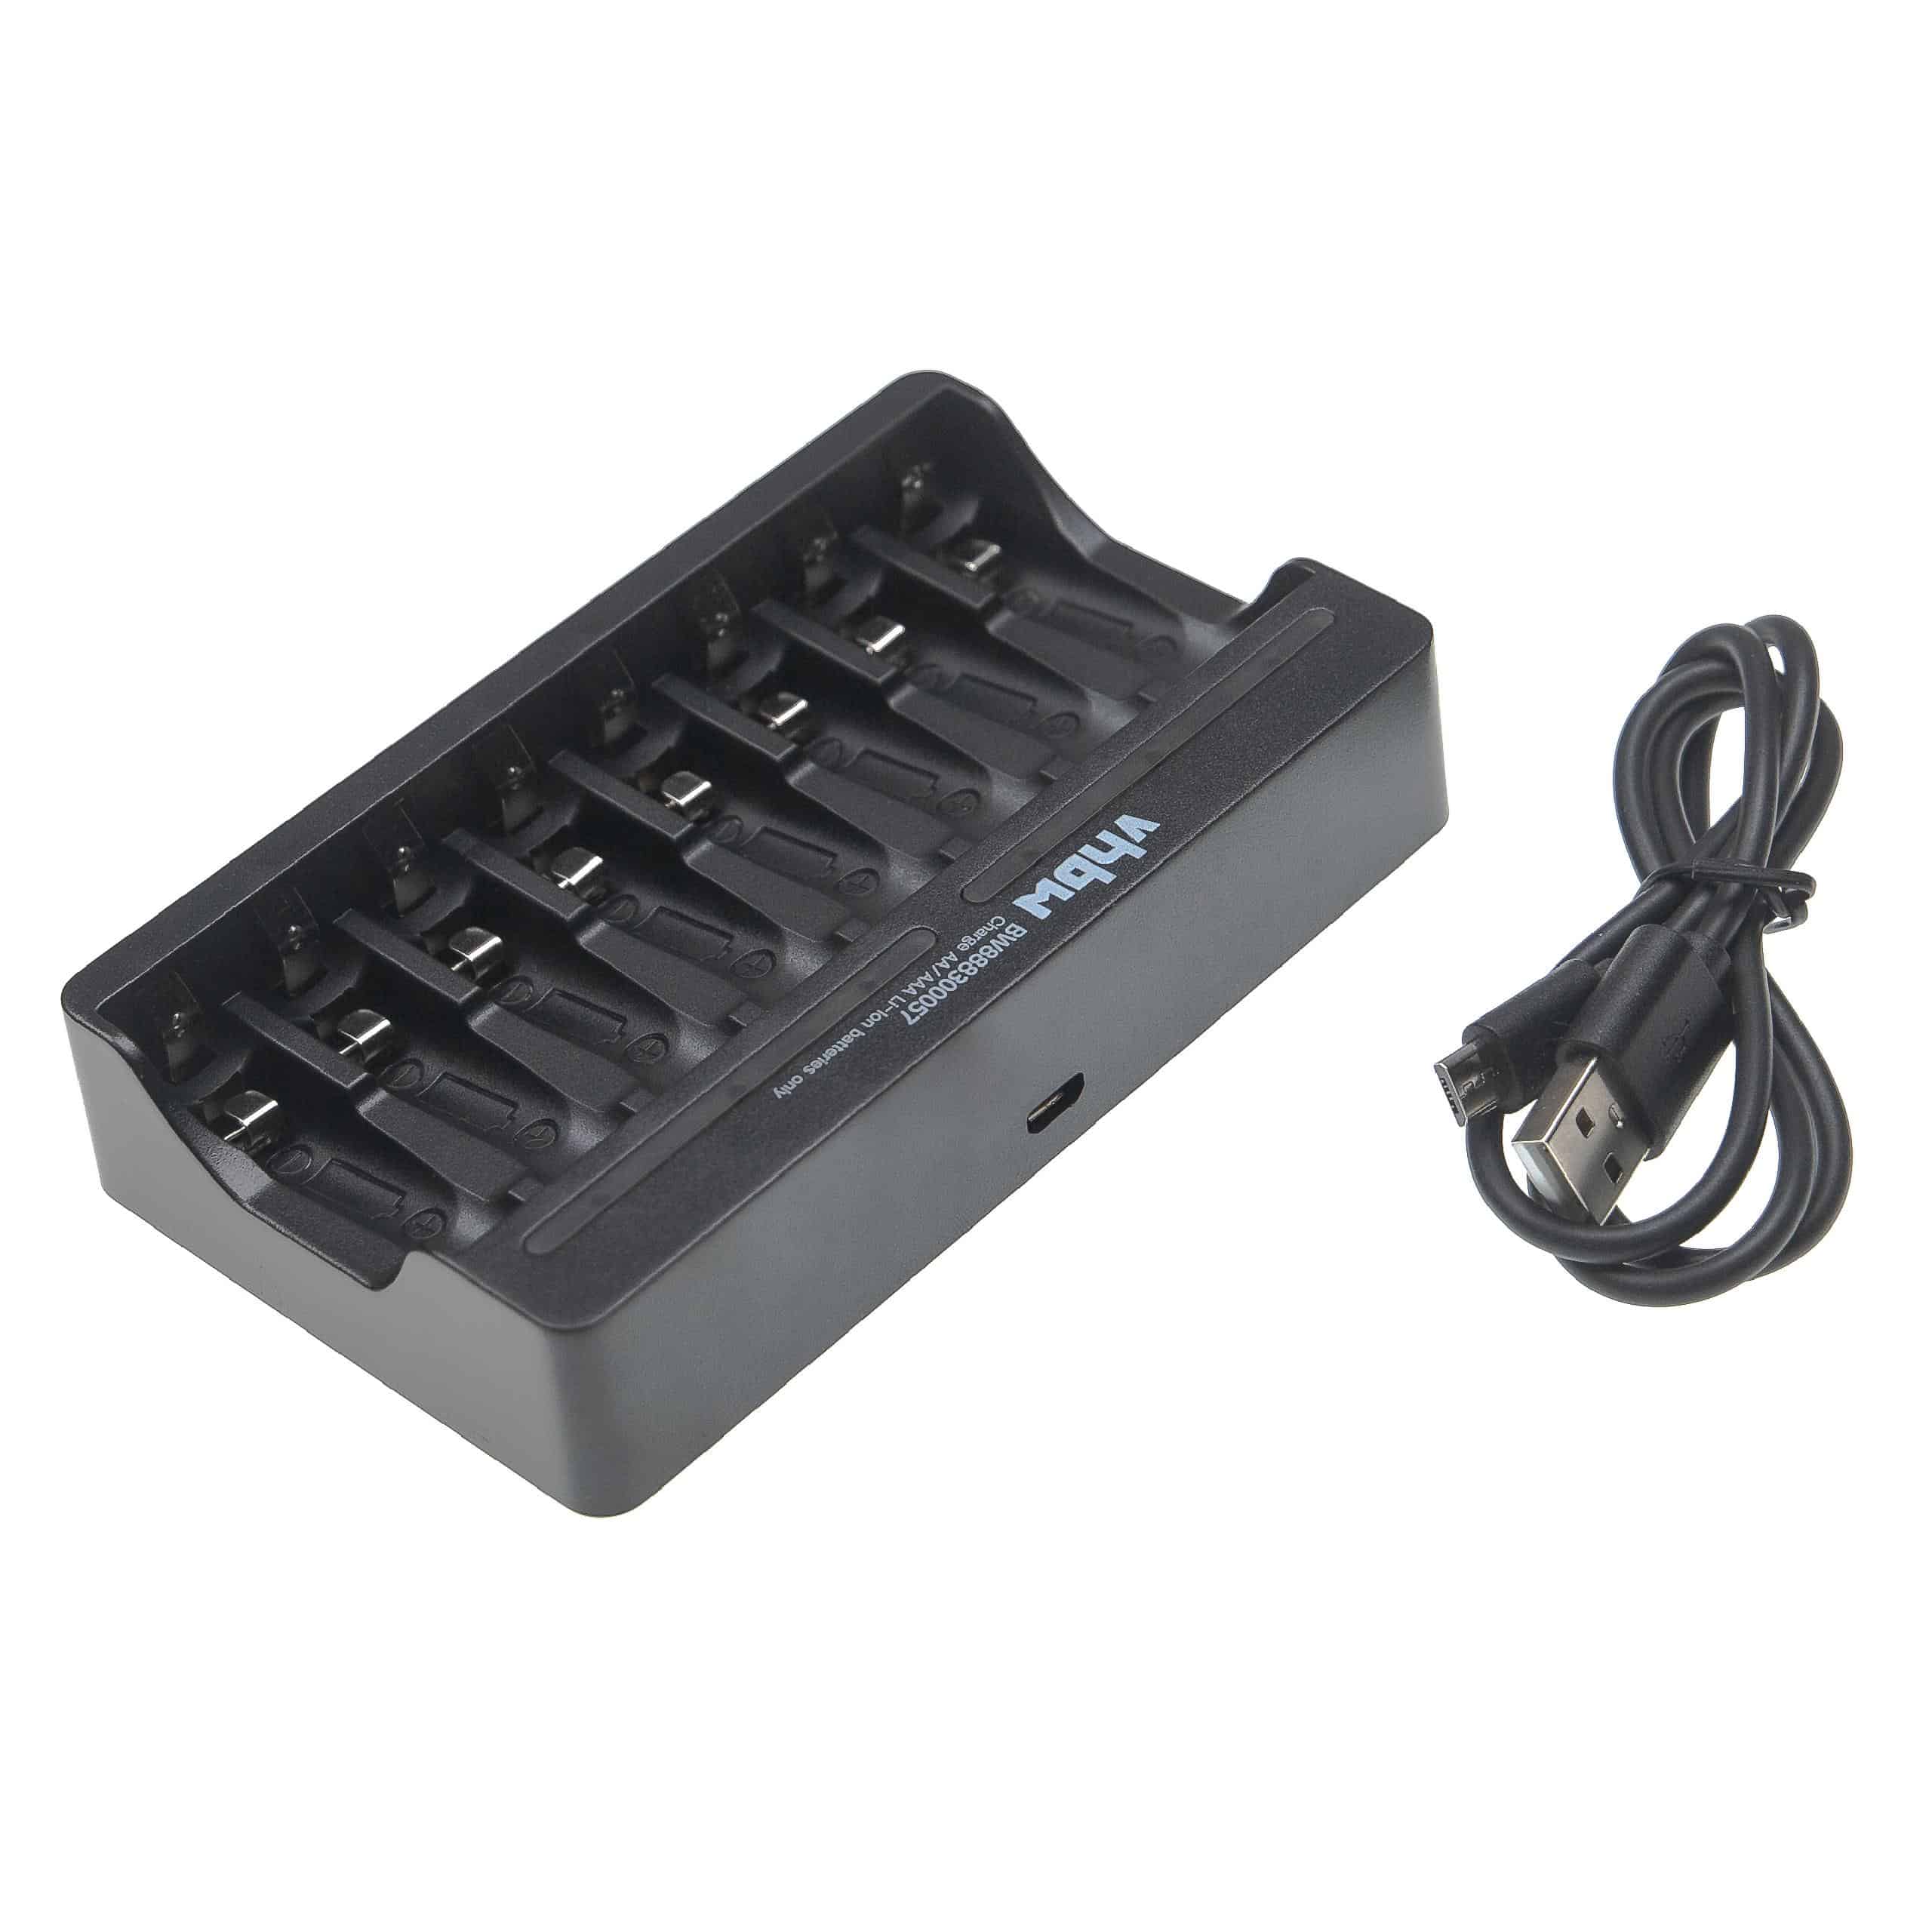 8 Slot Micro USB Charger suitable for AA, AAA Li-Ion Battery Cells